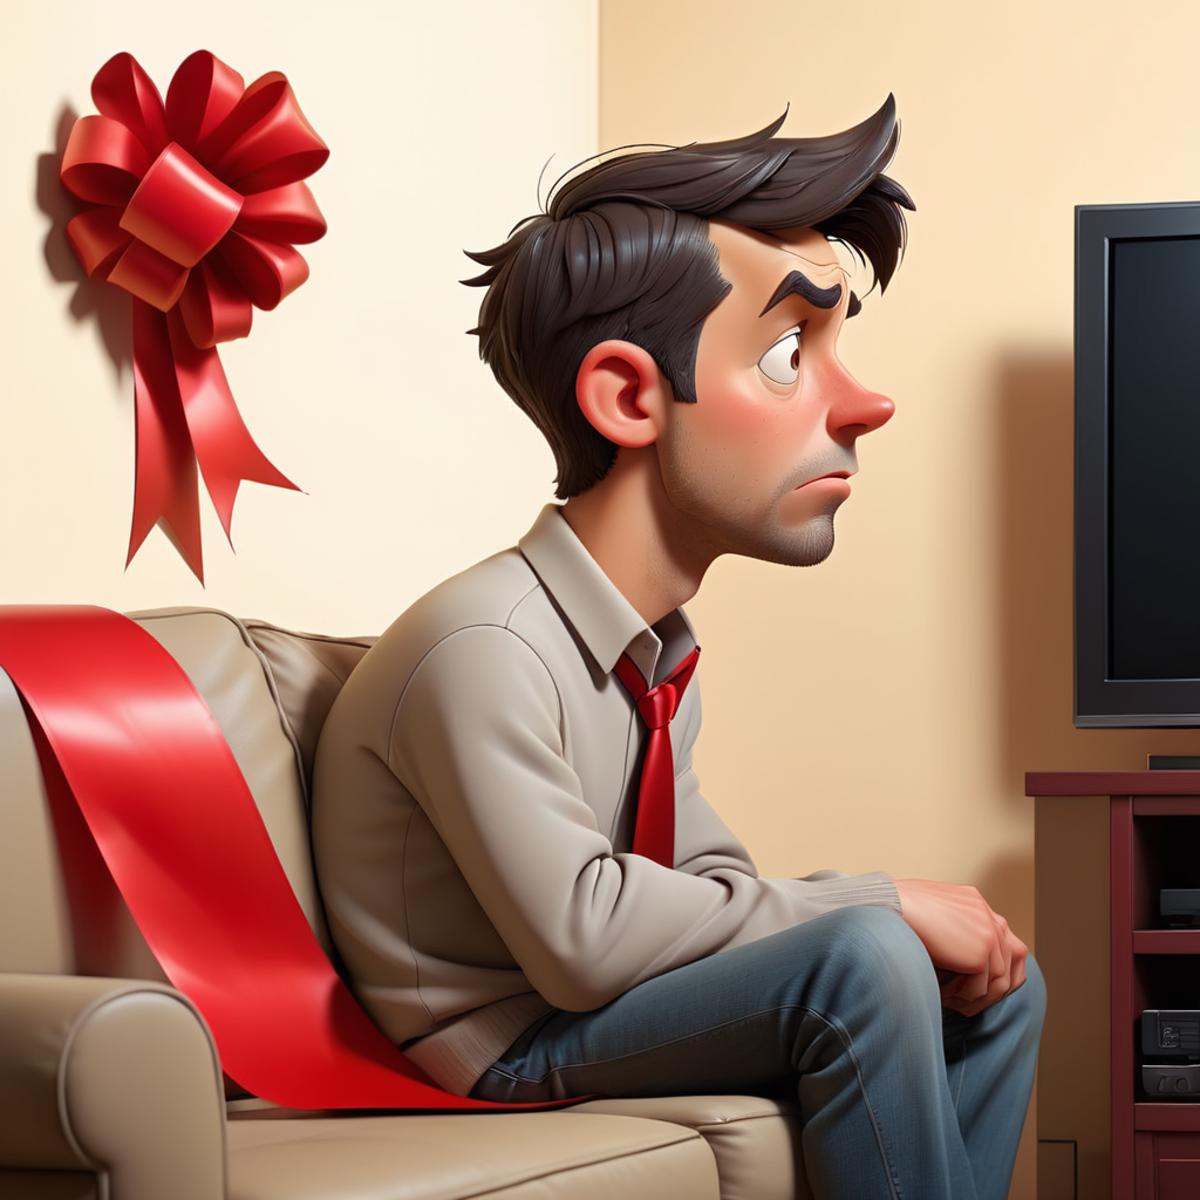 A man wearing a red tie is sitting in a chair and looking at a TV.